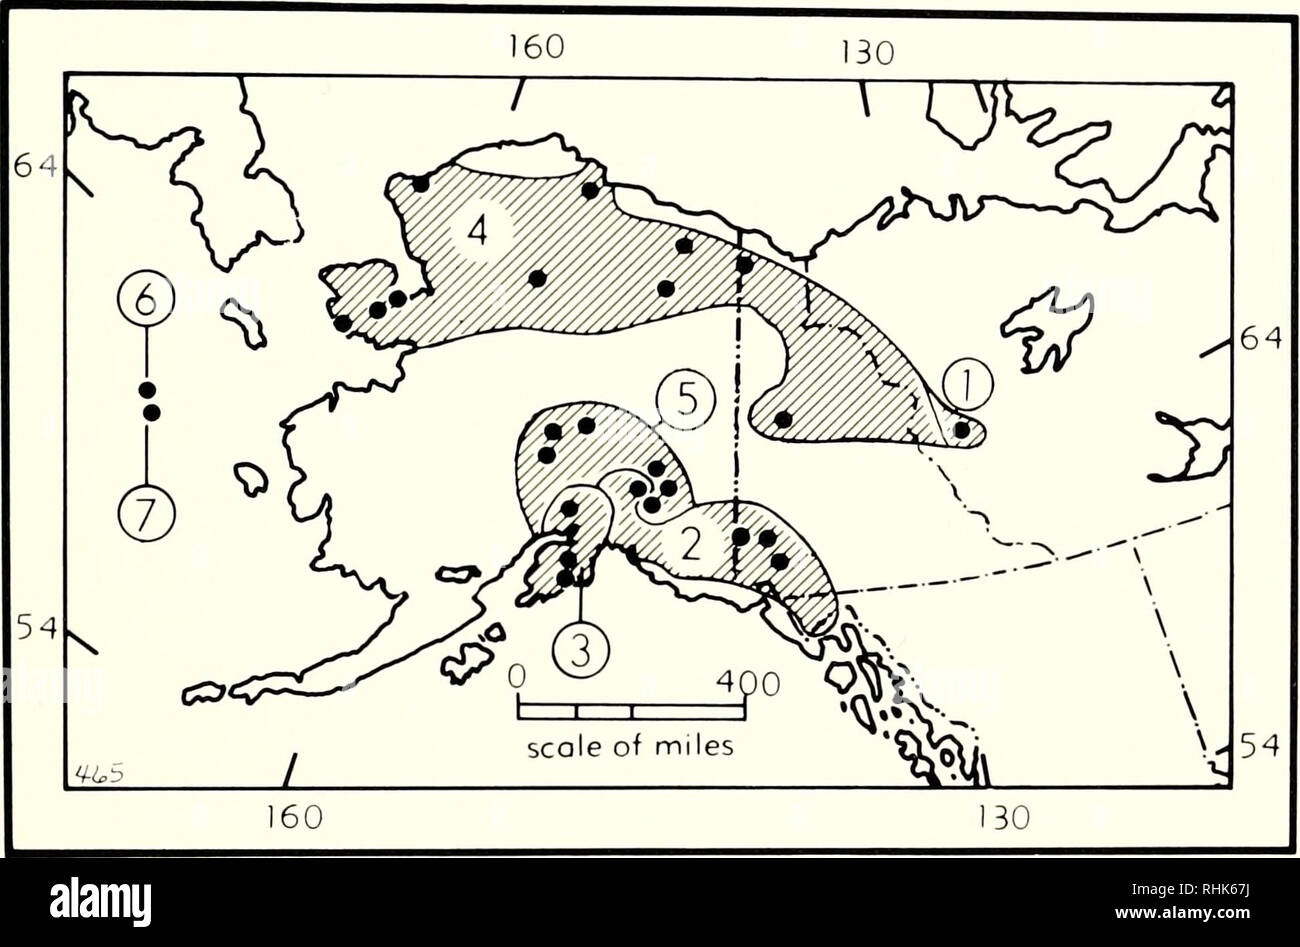 . Biology of New World Microtus. Rodents; Rodents; Microtus; Voles. Zoogeography 89. Fig. 2. Distribution of Microtus mturus (mainland) and its insular allospecies M. abbreviatus (modified from Hall, 1981). Subspecies are: , M. m. andersom; 2, M. m. cantator; 3, M. m. miurus; 4, M. m. muriei; 5, M. m. areas; 6, M. a. abbreviatus; 7, M. a. fisheri. (Fig. 2) are the singing vole, M. miurus (and its insular allospecies, the St. Matthew Island vole, M. abbreviatus), and the meadow vole, M. pennsylvanicus (Fig. 3). Microtus miurus and M. abbreviatus are classified in the subgenus Stenocranius toge Stock Photo